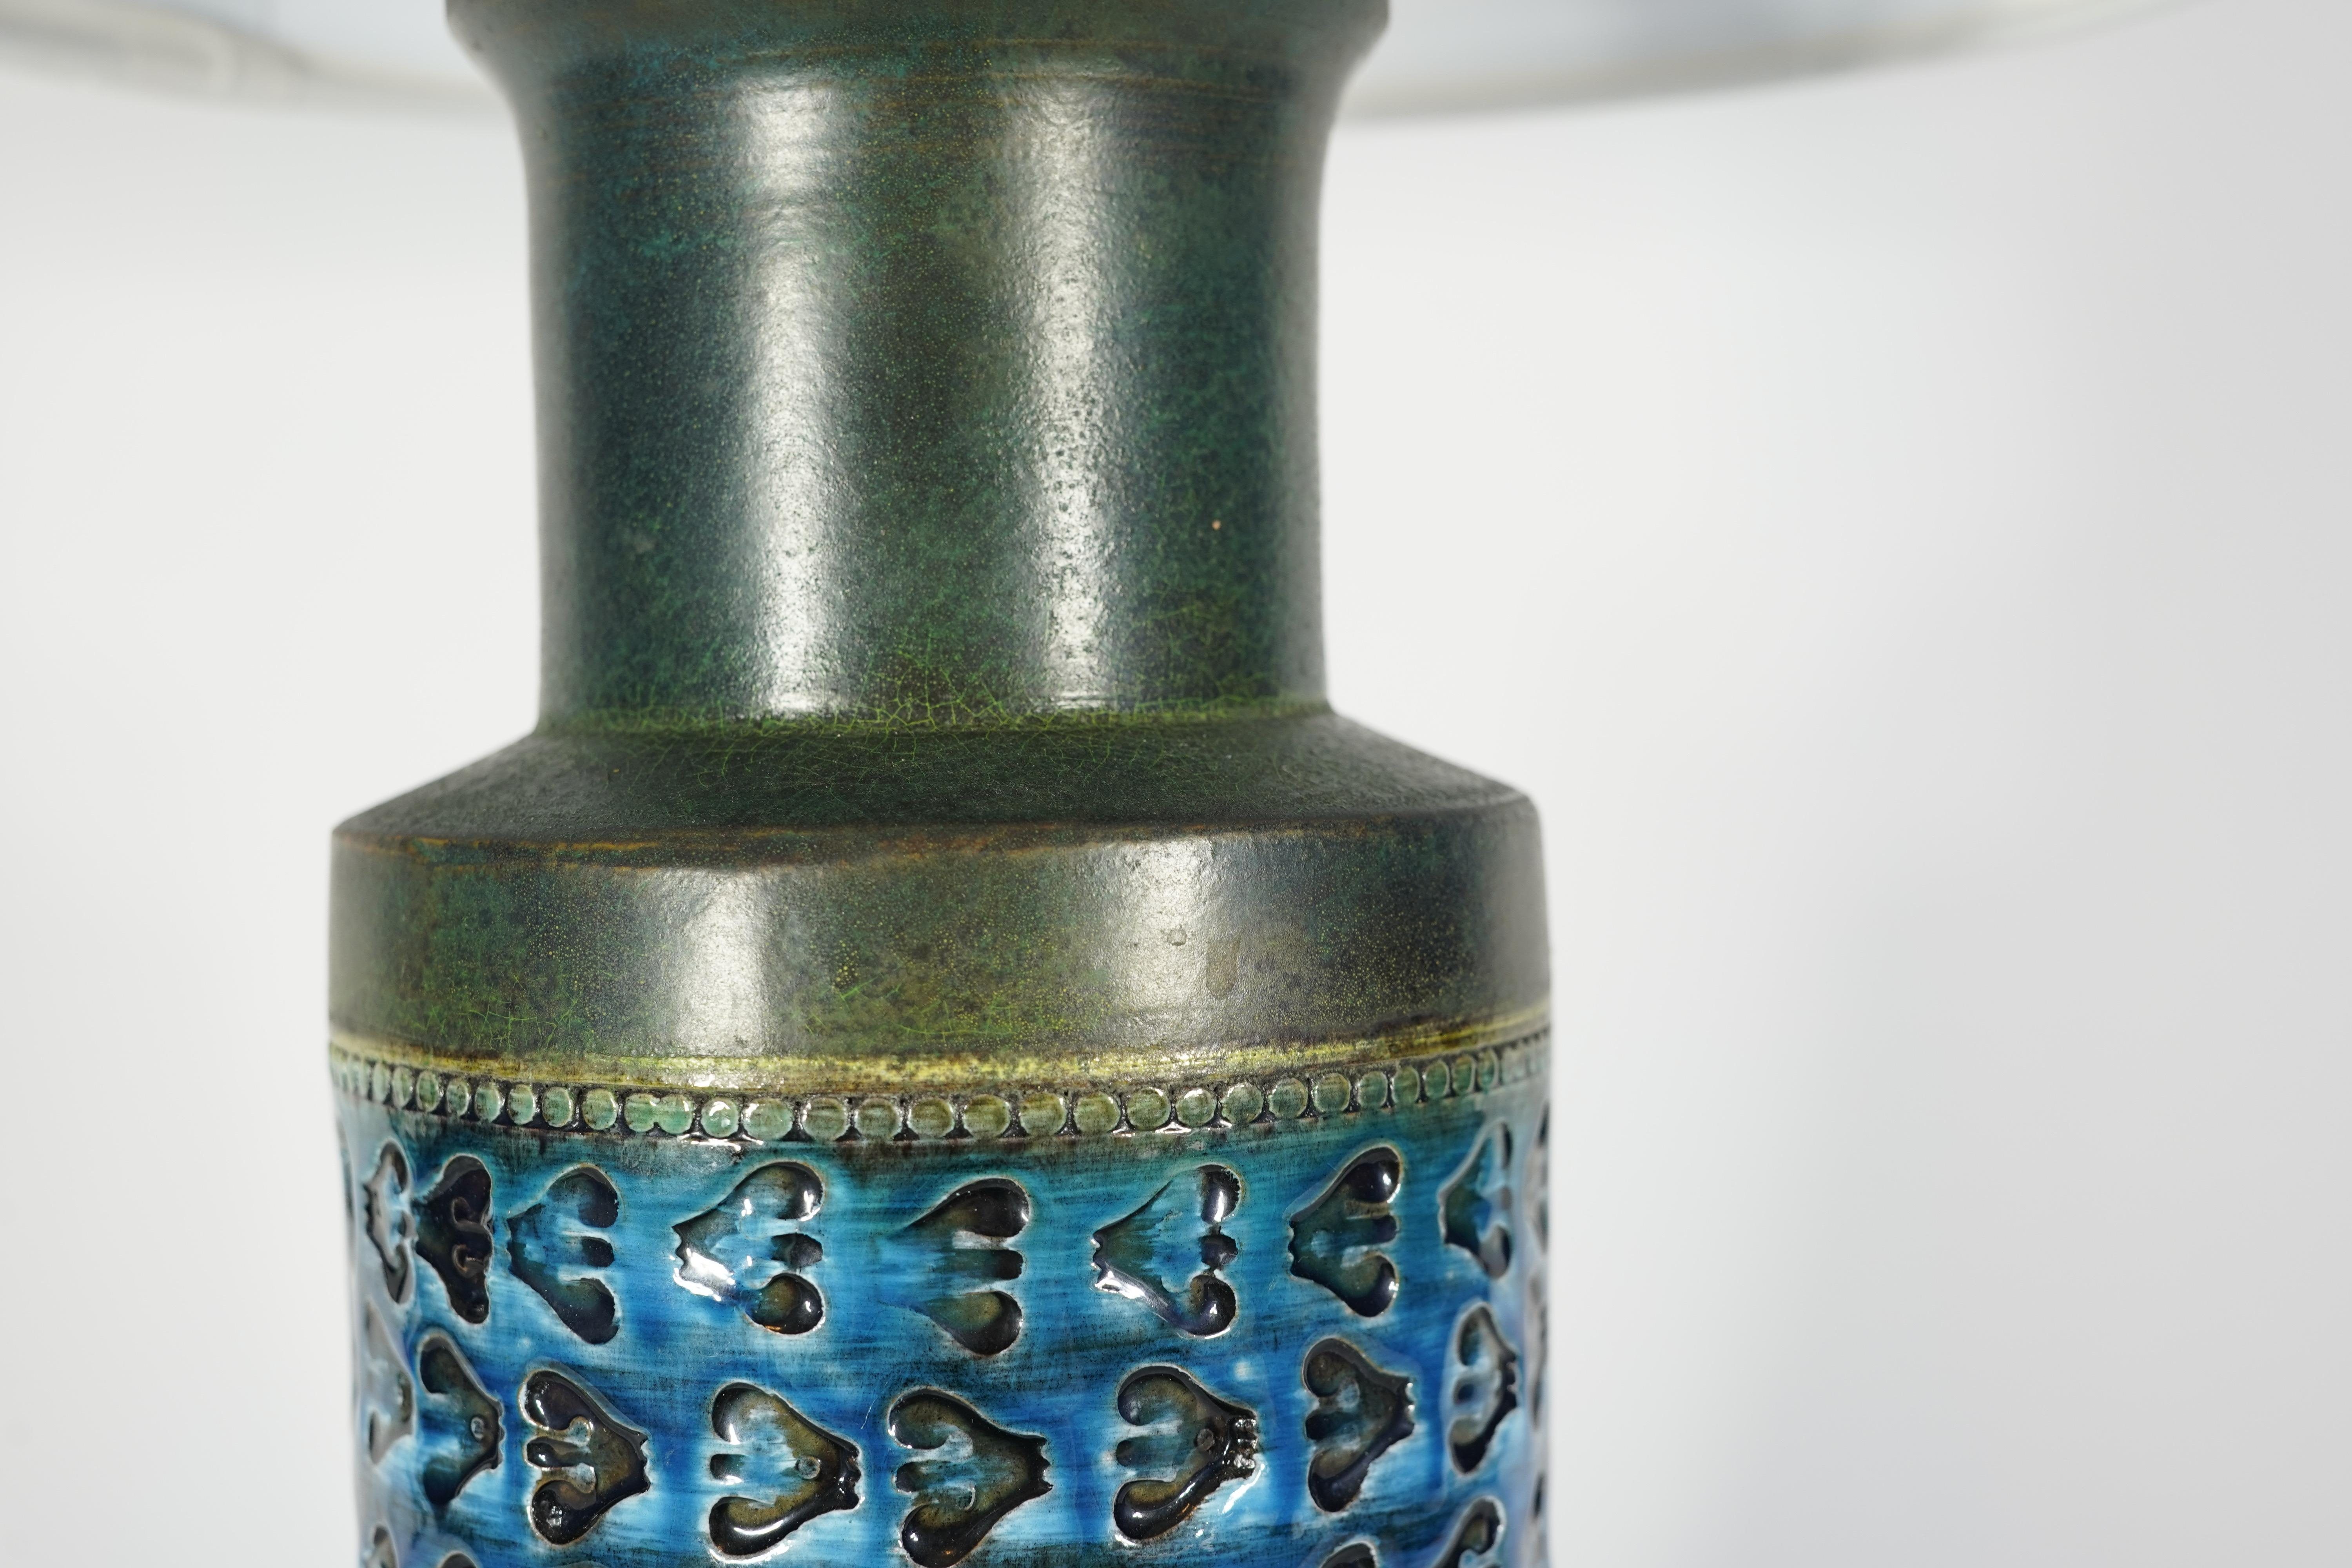 Bitossi lamp Italy 1970 ceramic green and blue glaze made by Bitossi but has stickers from Bergboms as they were sold by Bergboms, Sweden.
Very strong powerful body with such elegant glaze sort of a matte finish except from the blue stripe on the